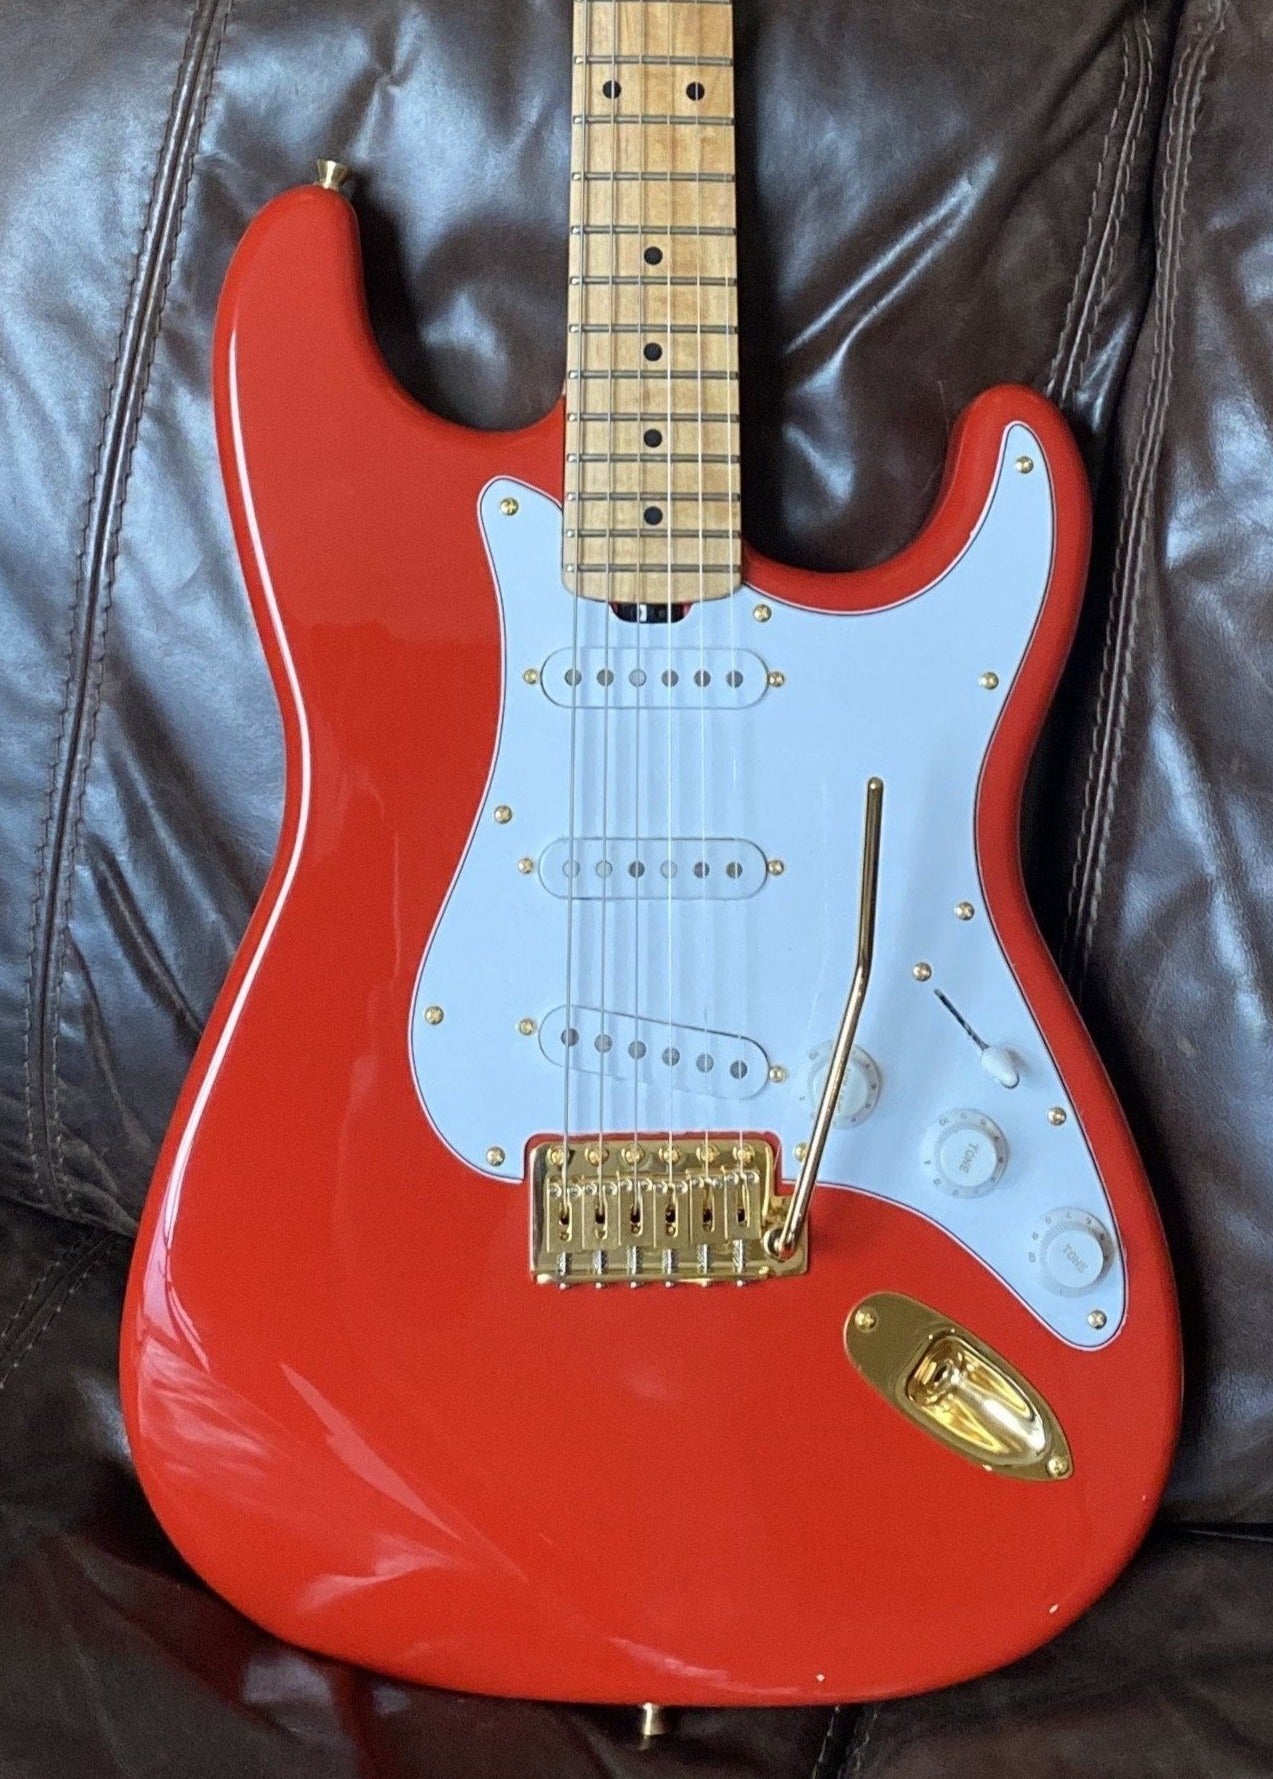 Gordon Smith Classic S "Hank Marvin Tribute", Electric Guitar for sale at Richards Guitars.